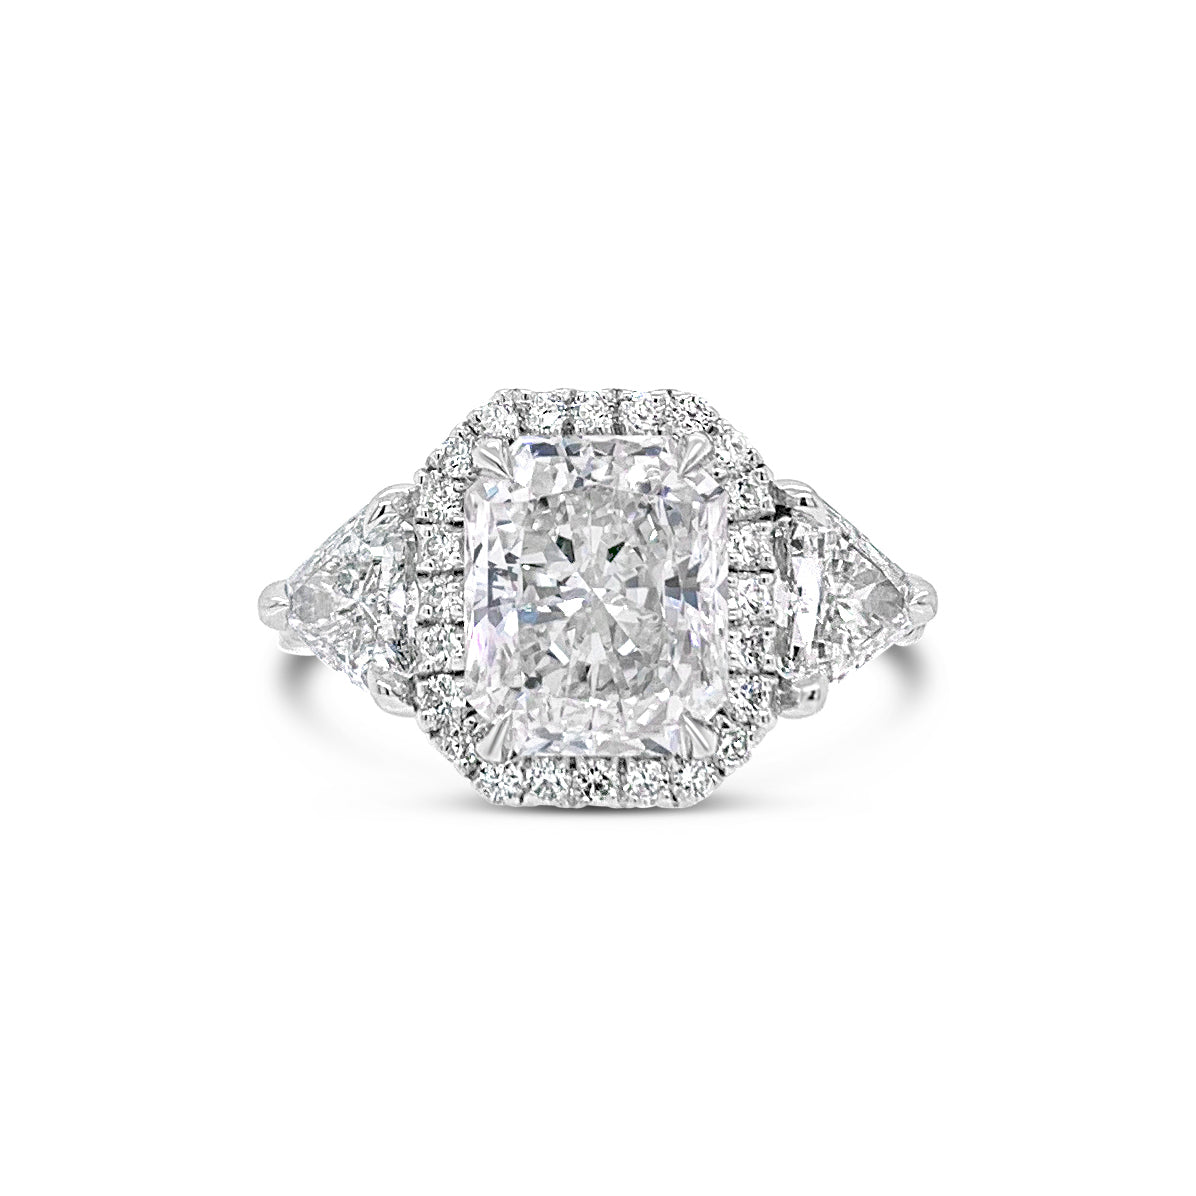 Three-Stone Elongated Radiant-Cut Diamond Engagement Ring  - 18KT white gold weighing 4.2 grams.  - 34 Round diamonds totaling .43 carats